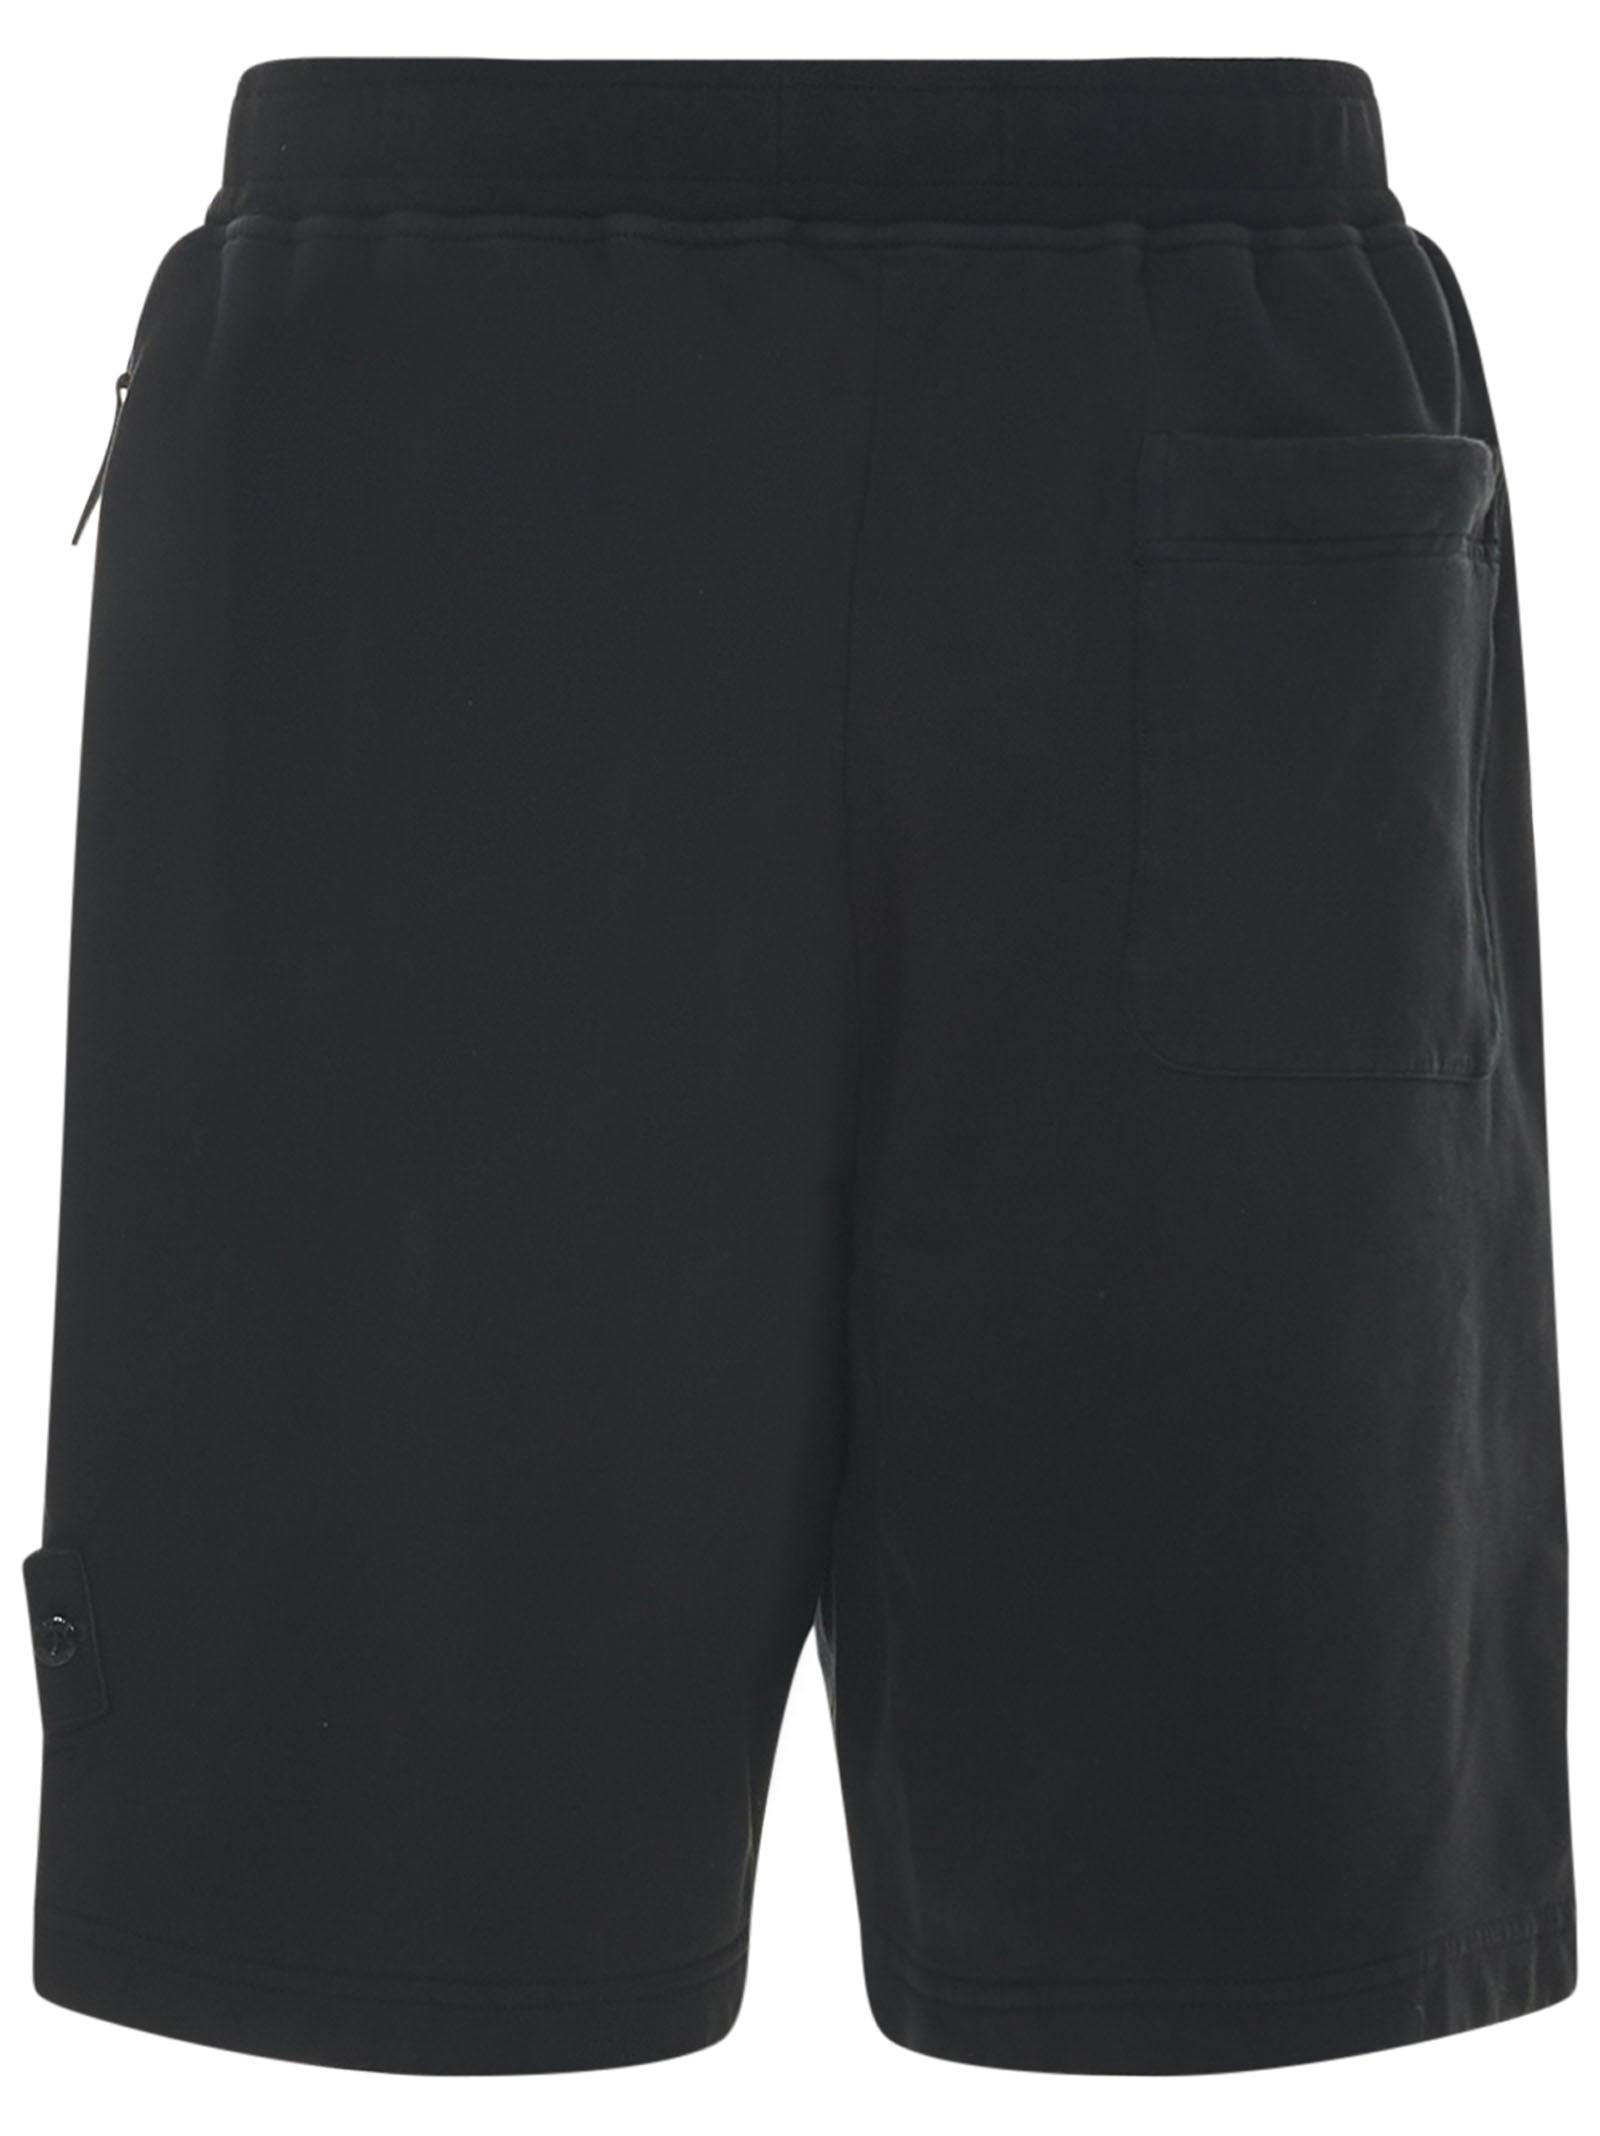 Stone Island Cotton Ghost Piece Shorts in Nero (Black) for Men | Lyst